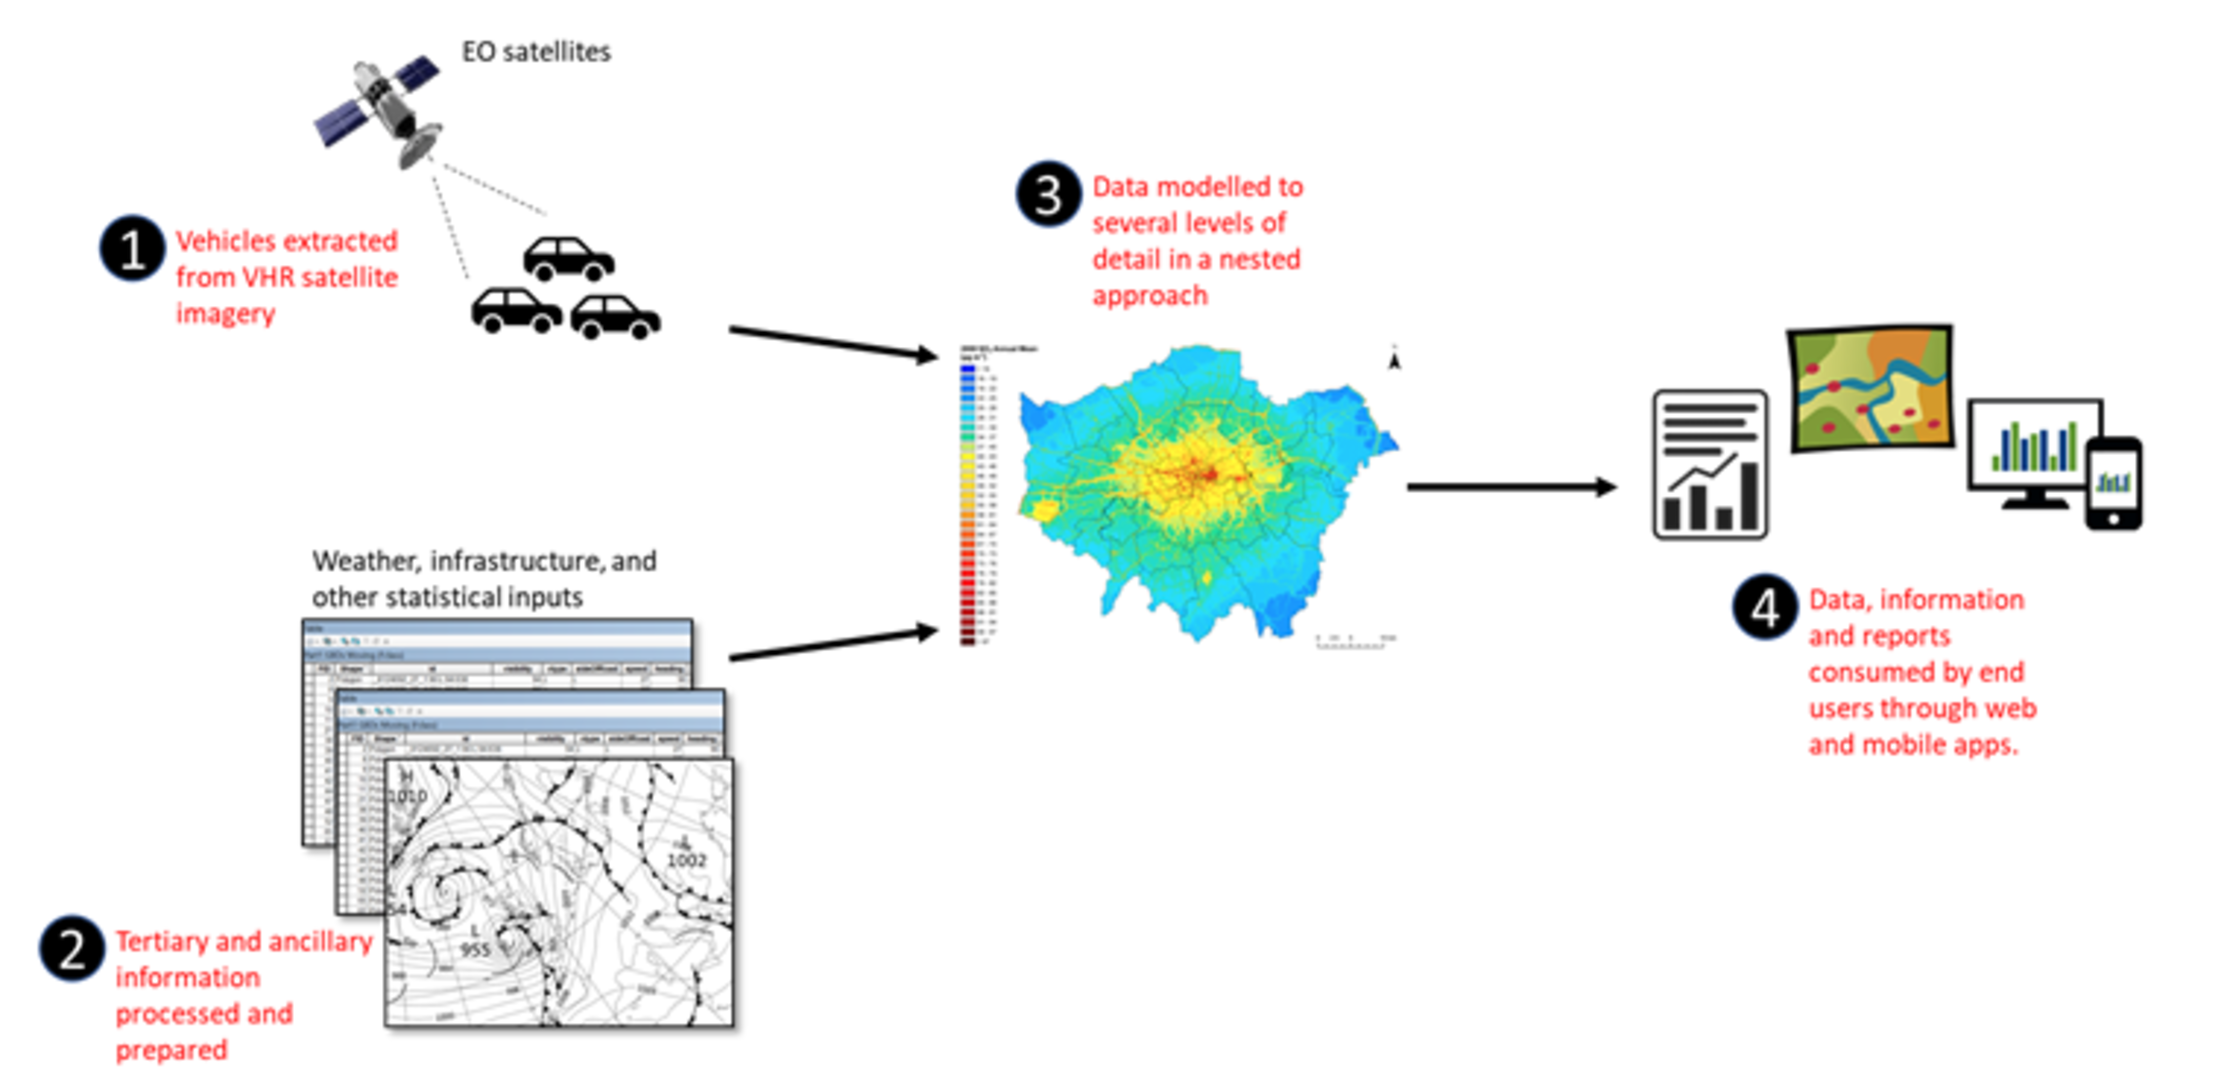 Monitoring air quality by counting vehicles